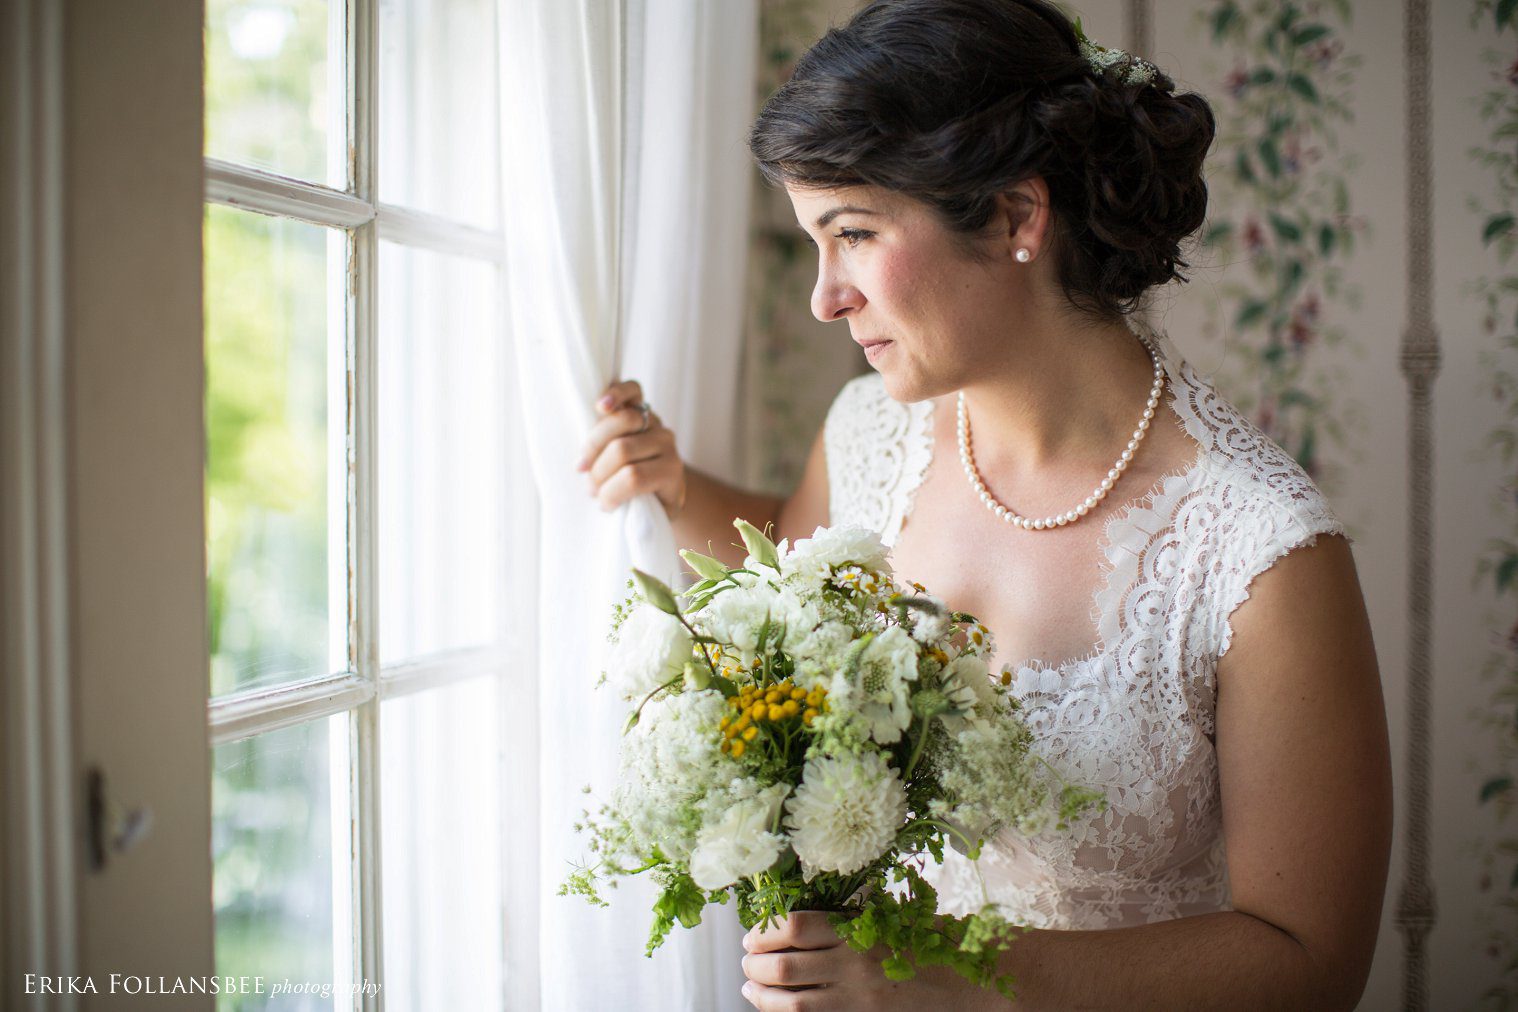 Bride looks out the window as she awaits her wedding ceremony | The Fells, NH